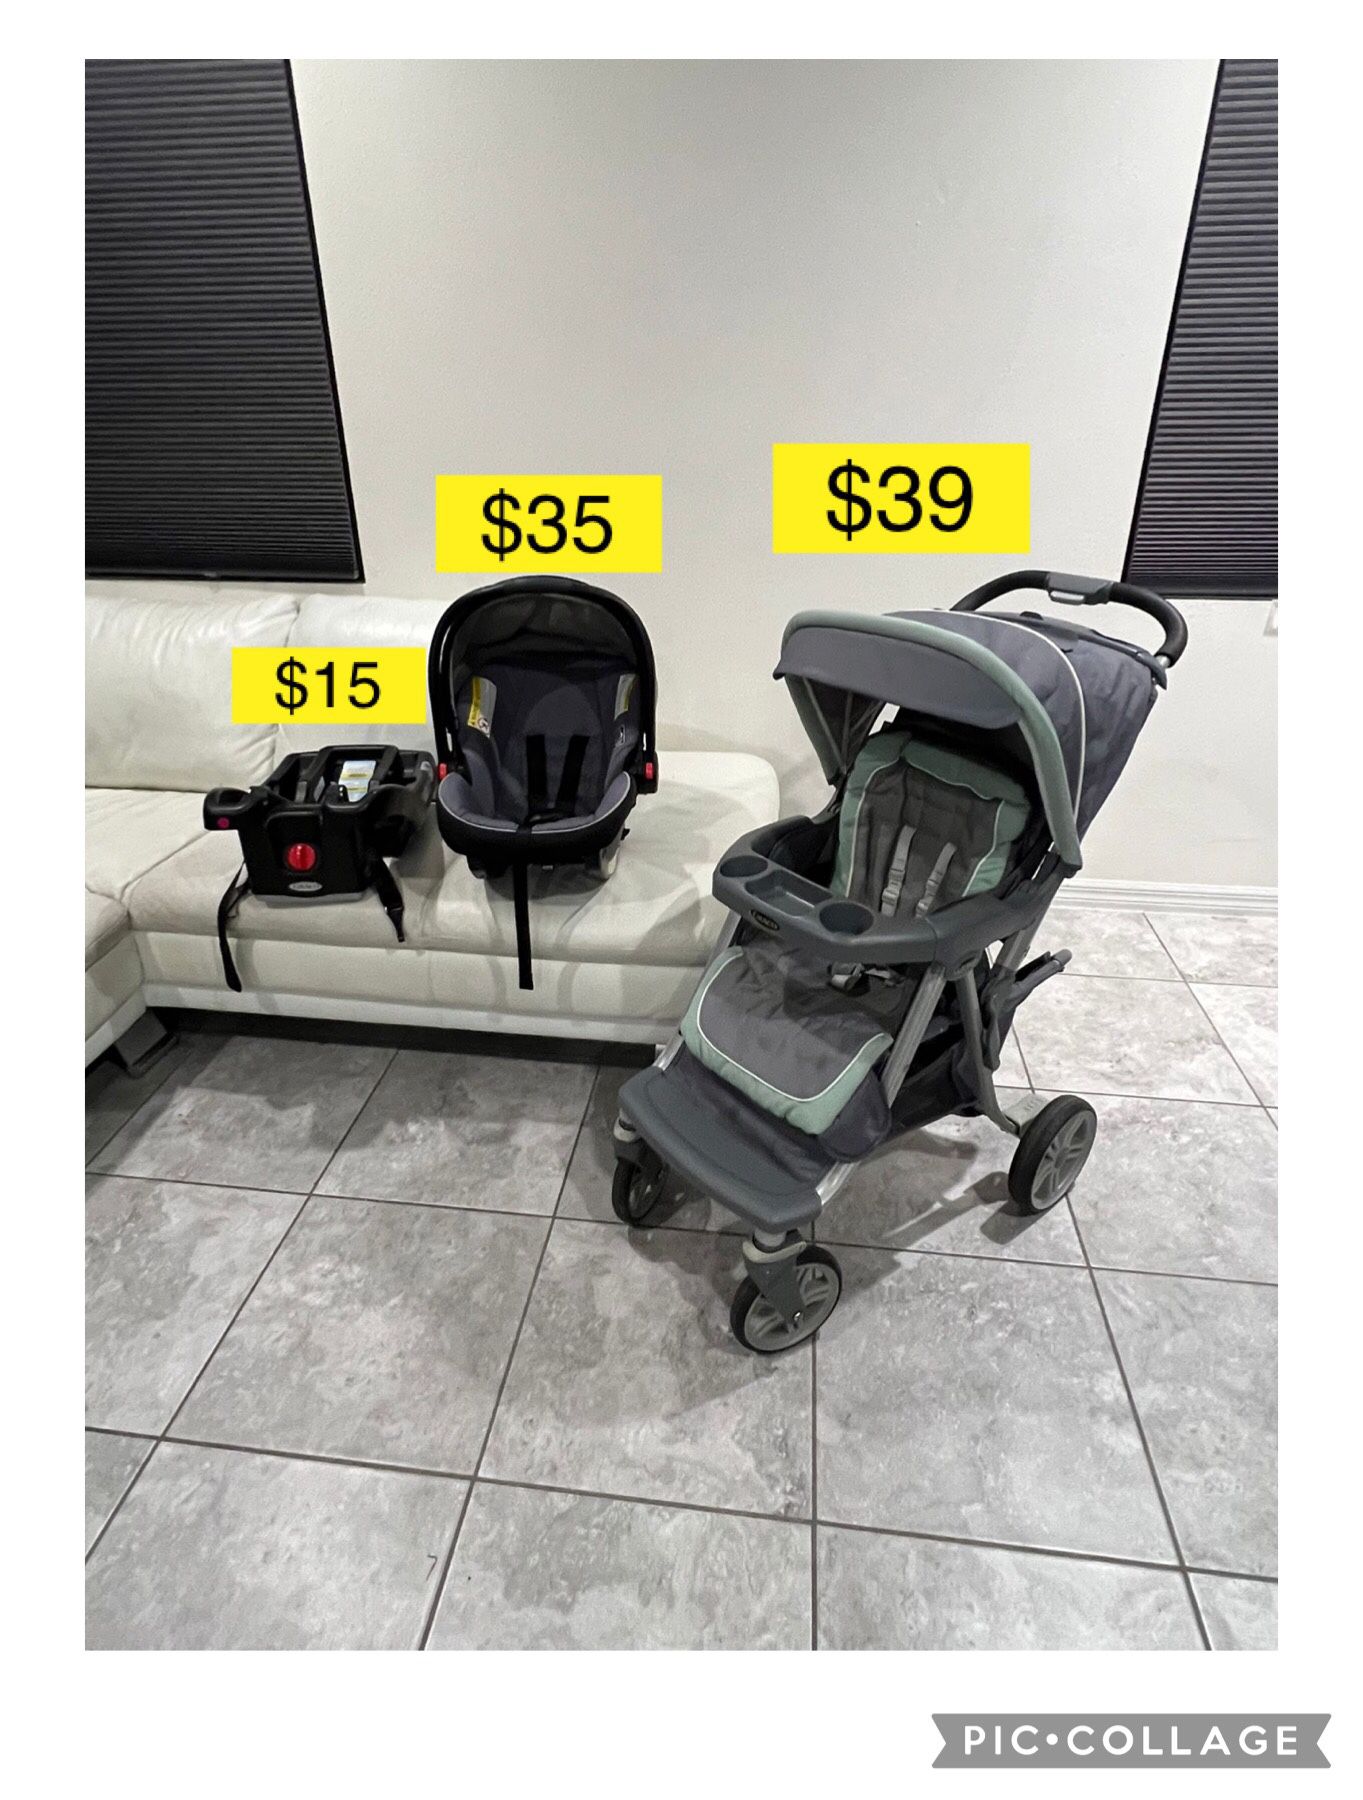 Graco baby infant car seat $35, base $15, stroler, recliner $39 or all $89 firm price / Porta bebe $35, base $15, coche reclinable $39